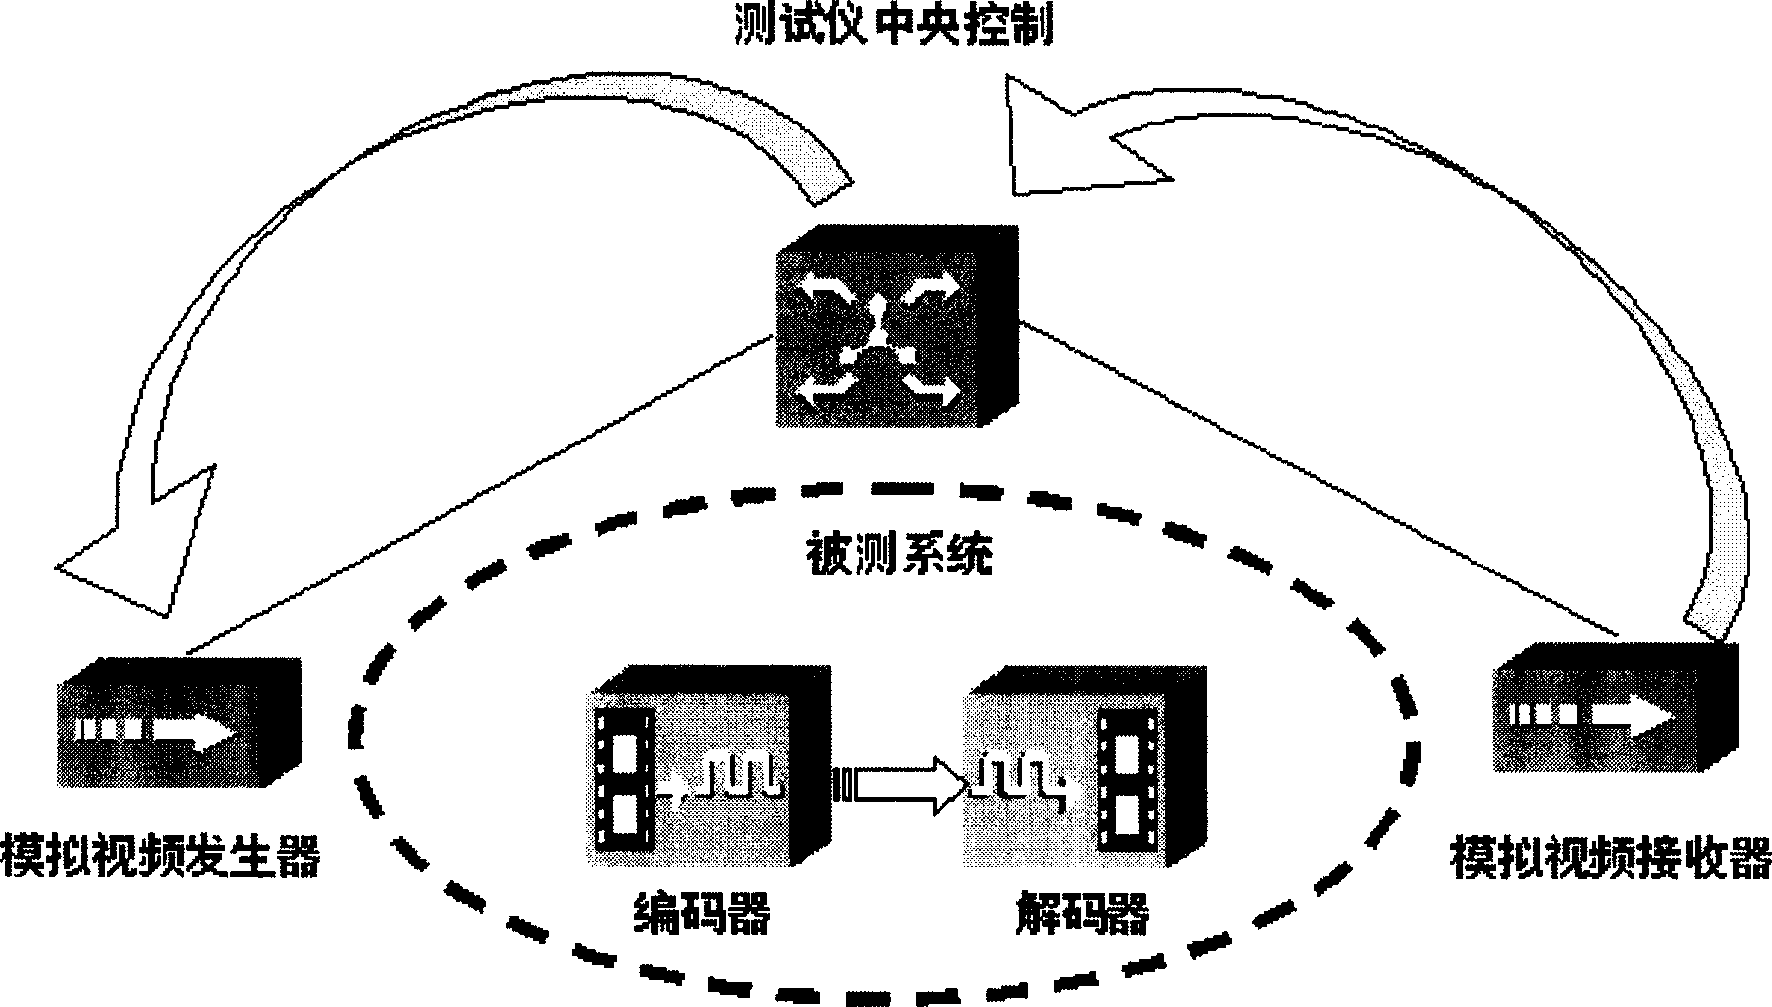 Video frequency broadcast quality detecting method for medium broadcast terminal device